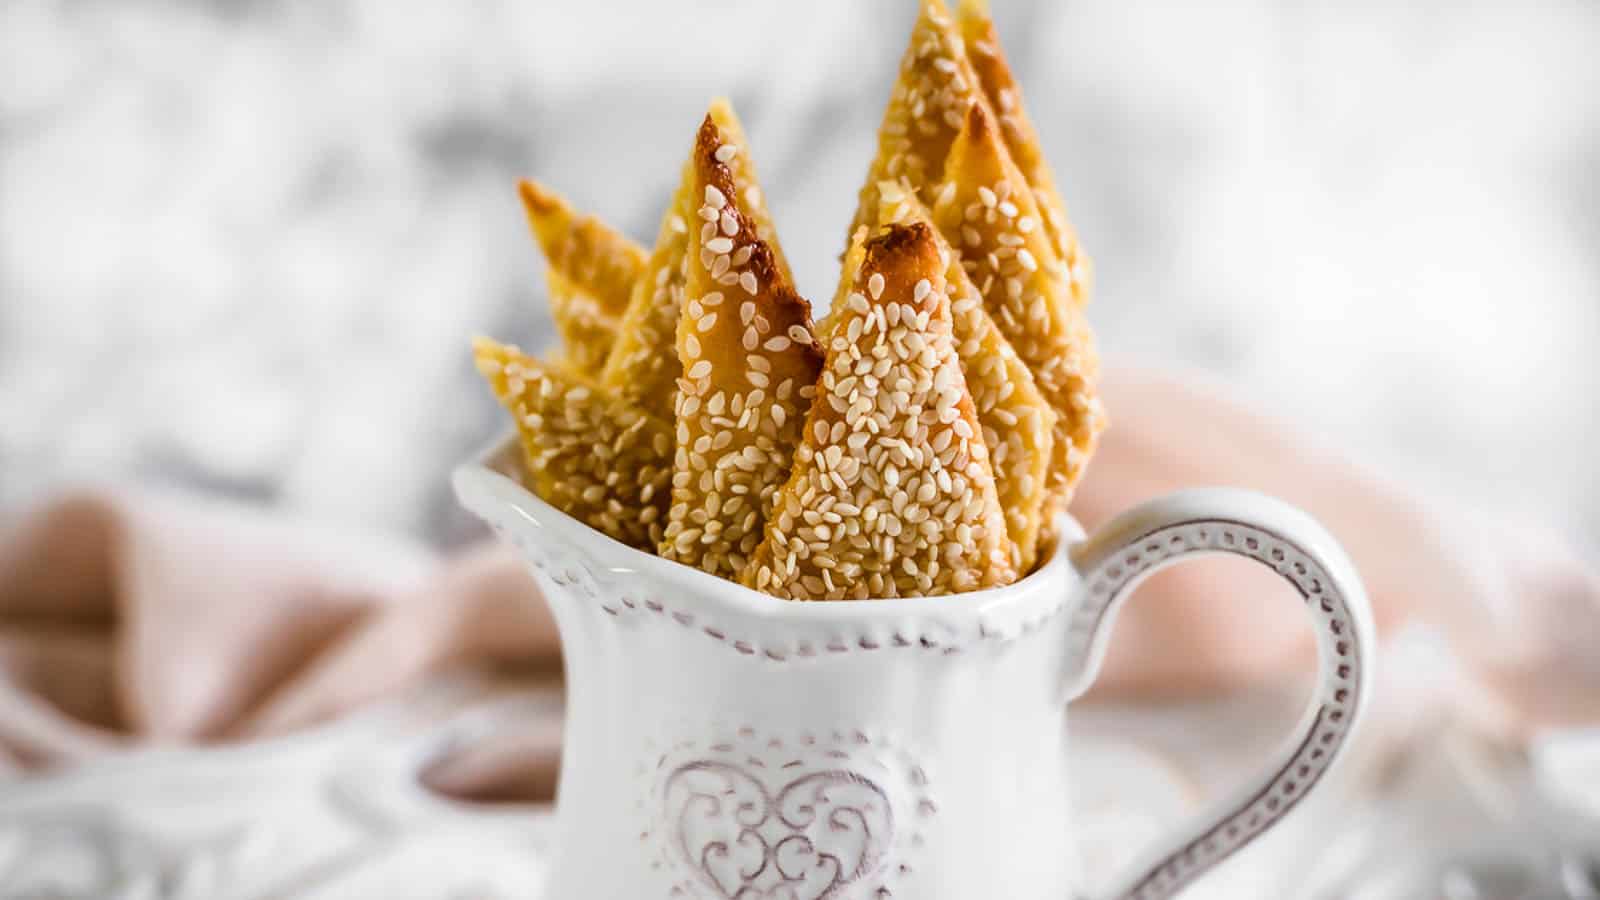 <p>Ever tried Sesame Fathead Crackers? They’re not your average cracker. These guys are low-carb and packed with a rich sesame flavor that’s just sensational. Perfect for pairing with cheeses or your favorite dips. They’ll definitely stand out in your party snack lineup!<br><strong>Get the Recipe: </strong><a href="https://www.lowcarb-nocarb.com/sesame-keto-crackers-recipe/?utm_source=msn&utm_medium=page&utm_campaign=msn">Sesame Fathead Crackers</a></p>